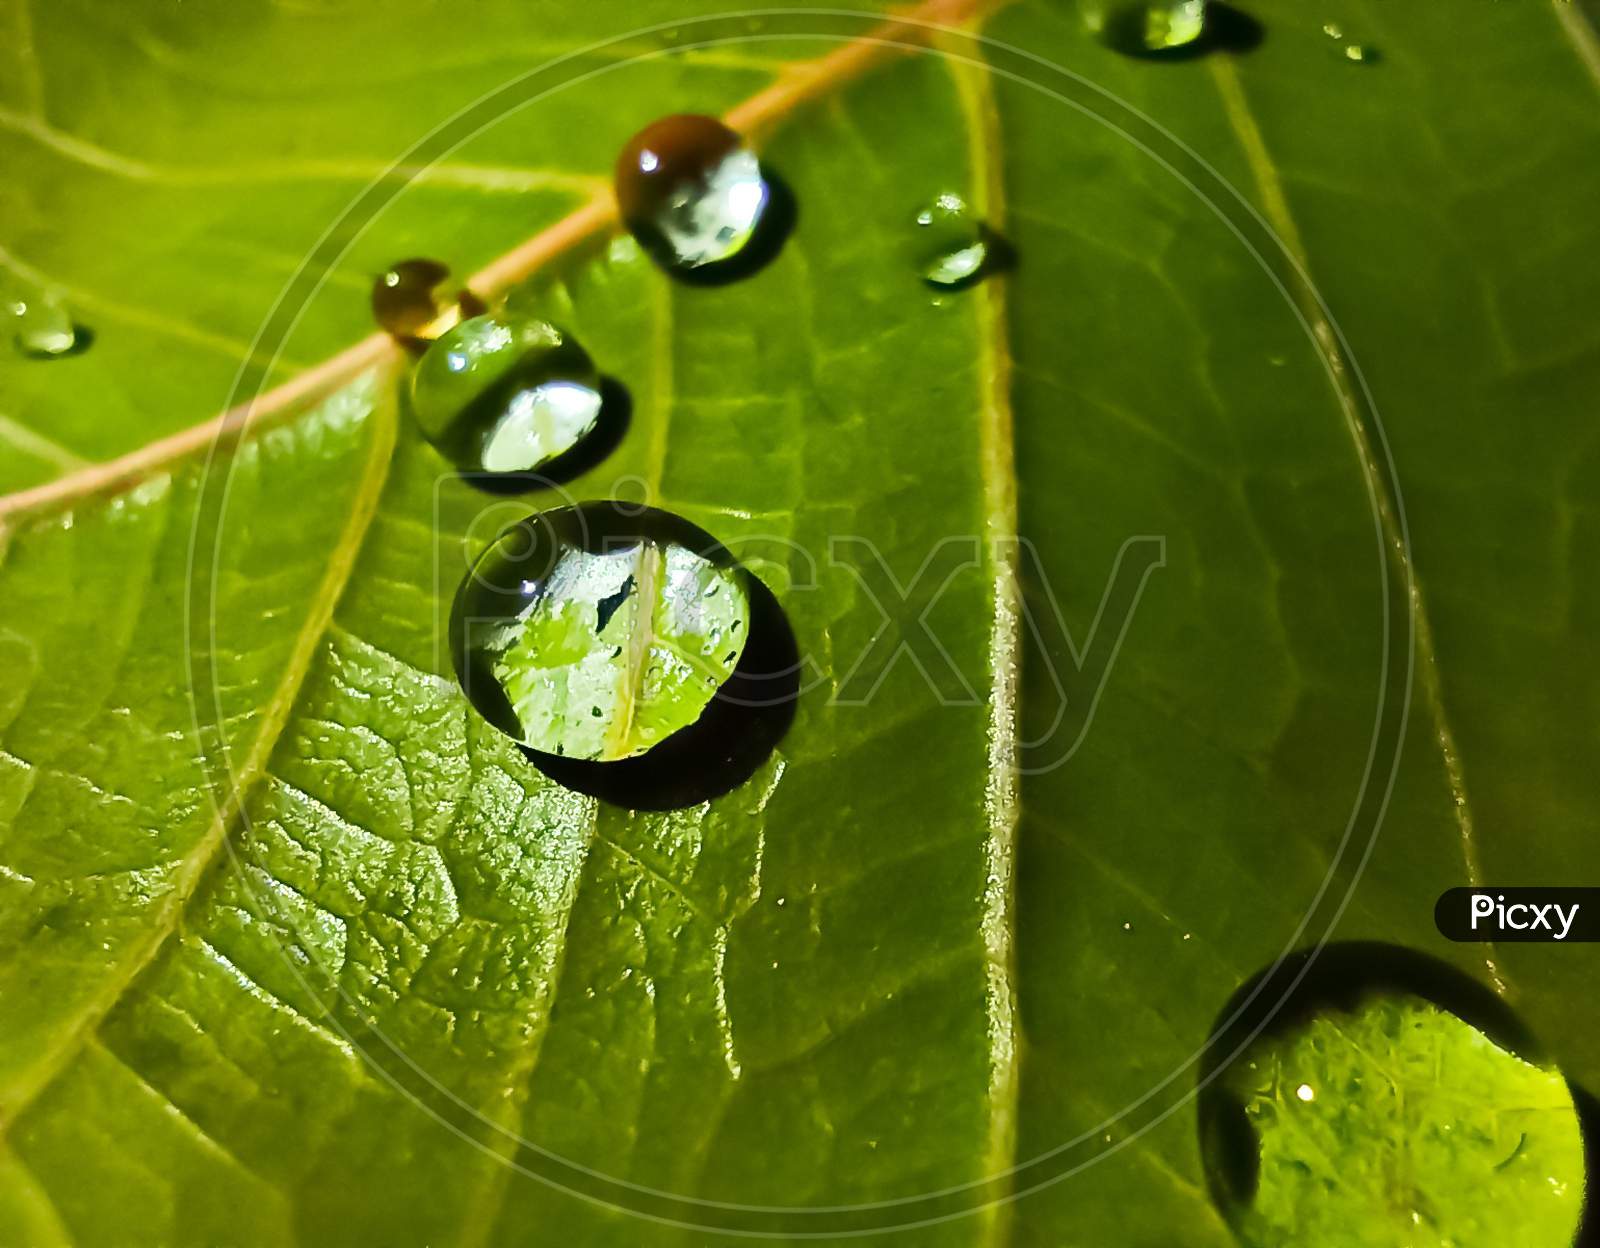 The water droplets